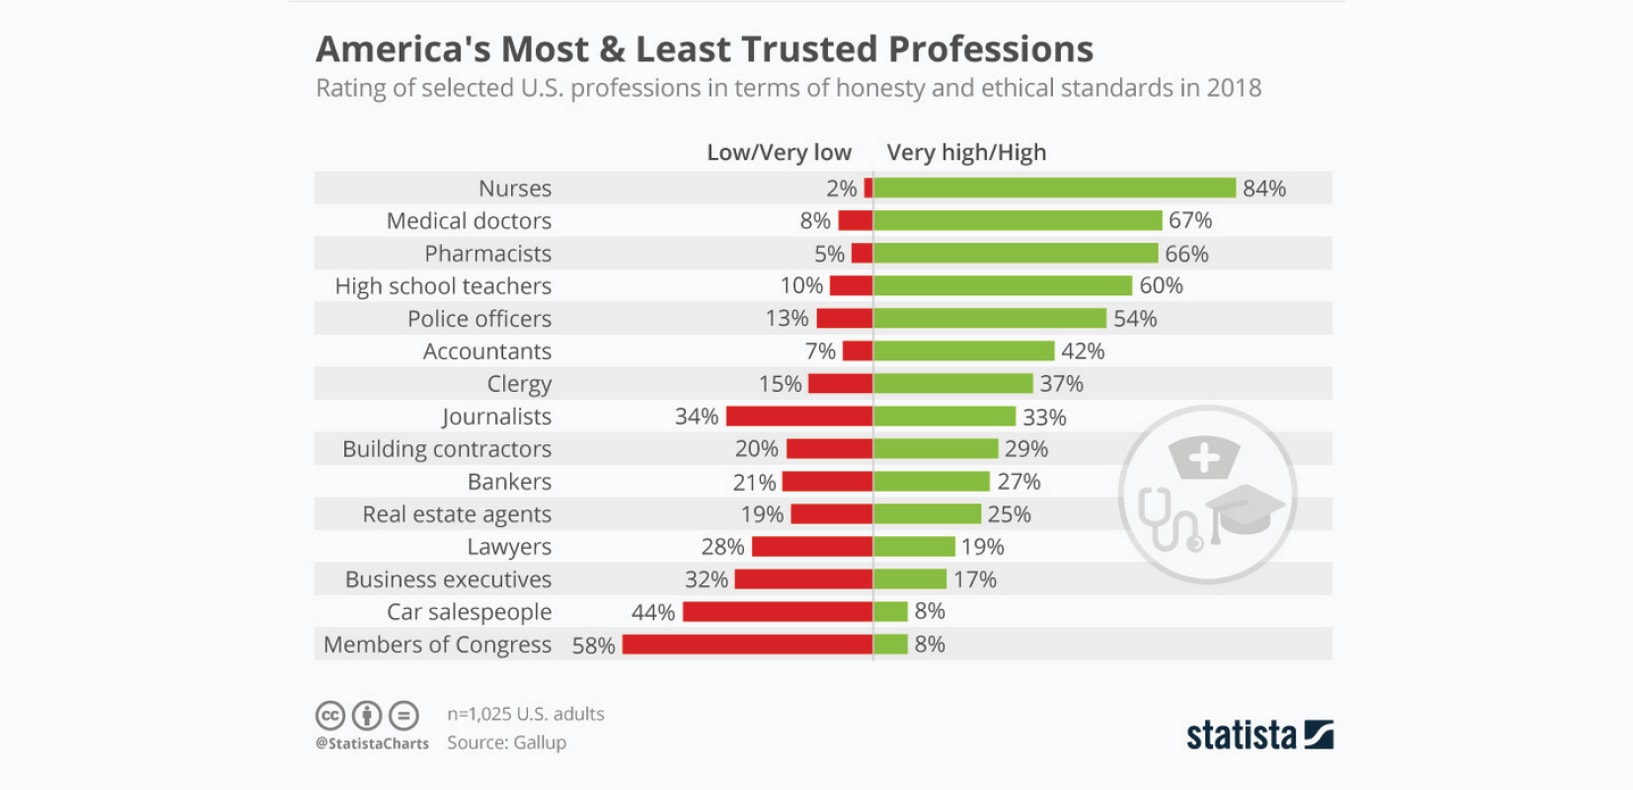 Bar graph titled America's most and least trusted professionals. From most trusted to least trusted the list of professions reads nurses, medical doctors, pharmacists, high school teachers, police officers, accountants, clergy, journalists, building contractors, bankers, real estate agents, lawyers, business executives, car salespeople, members of congress.